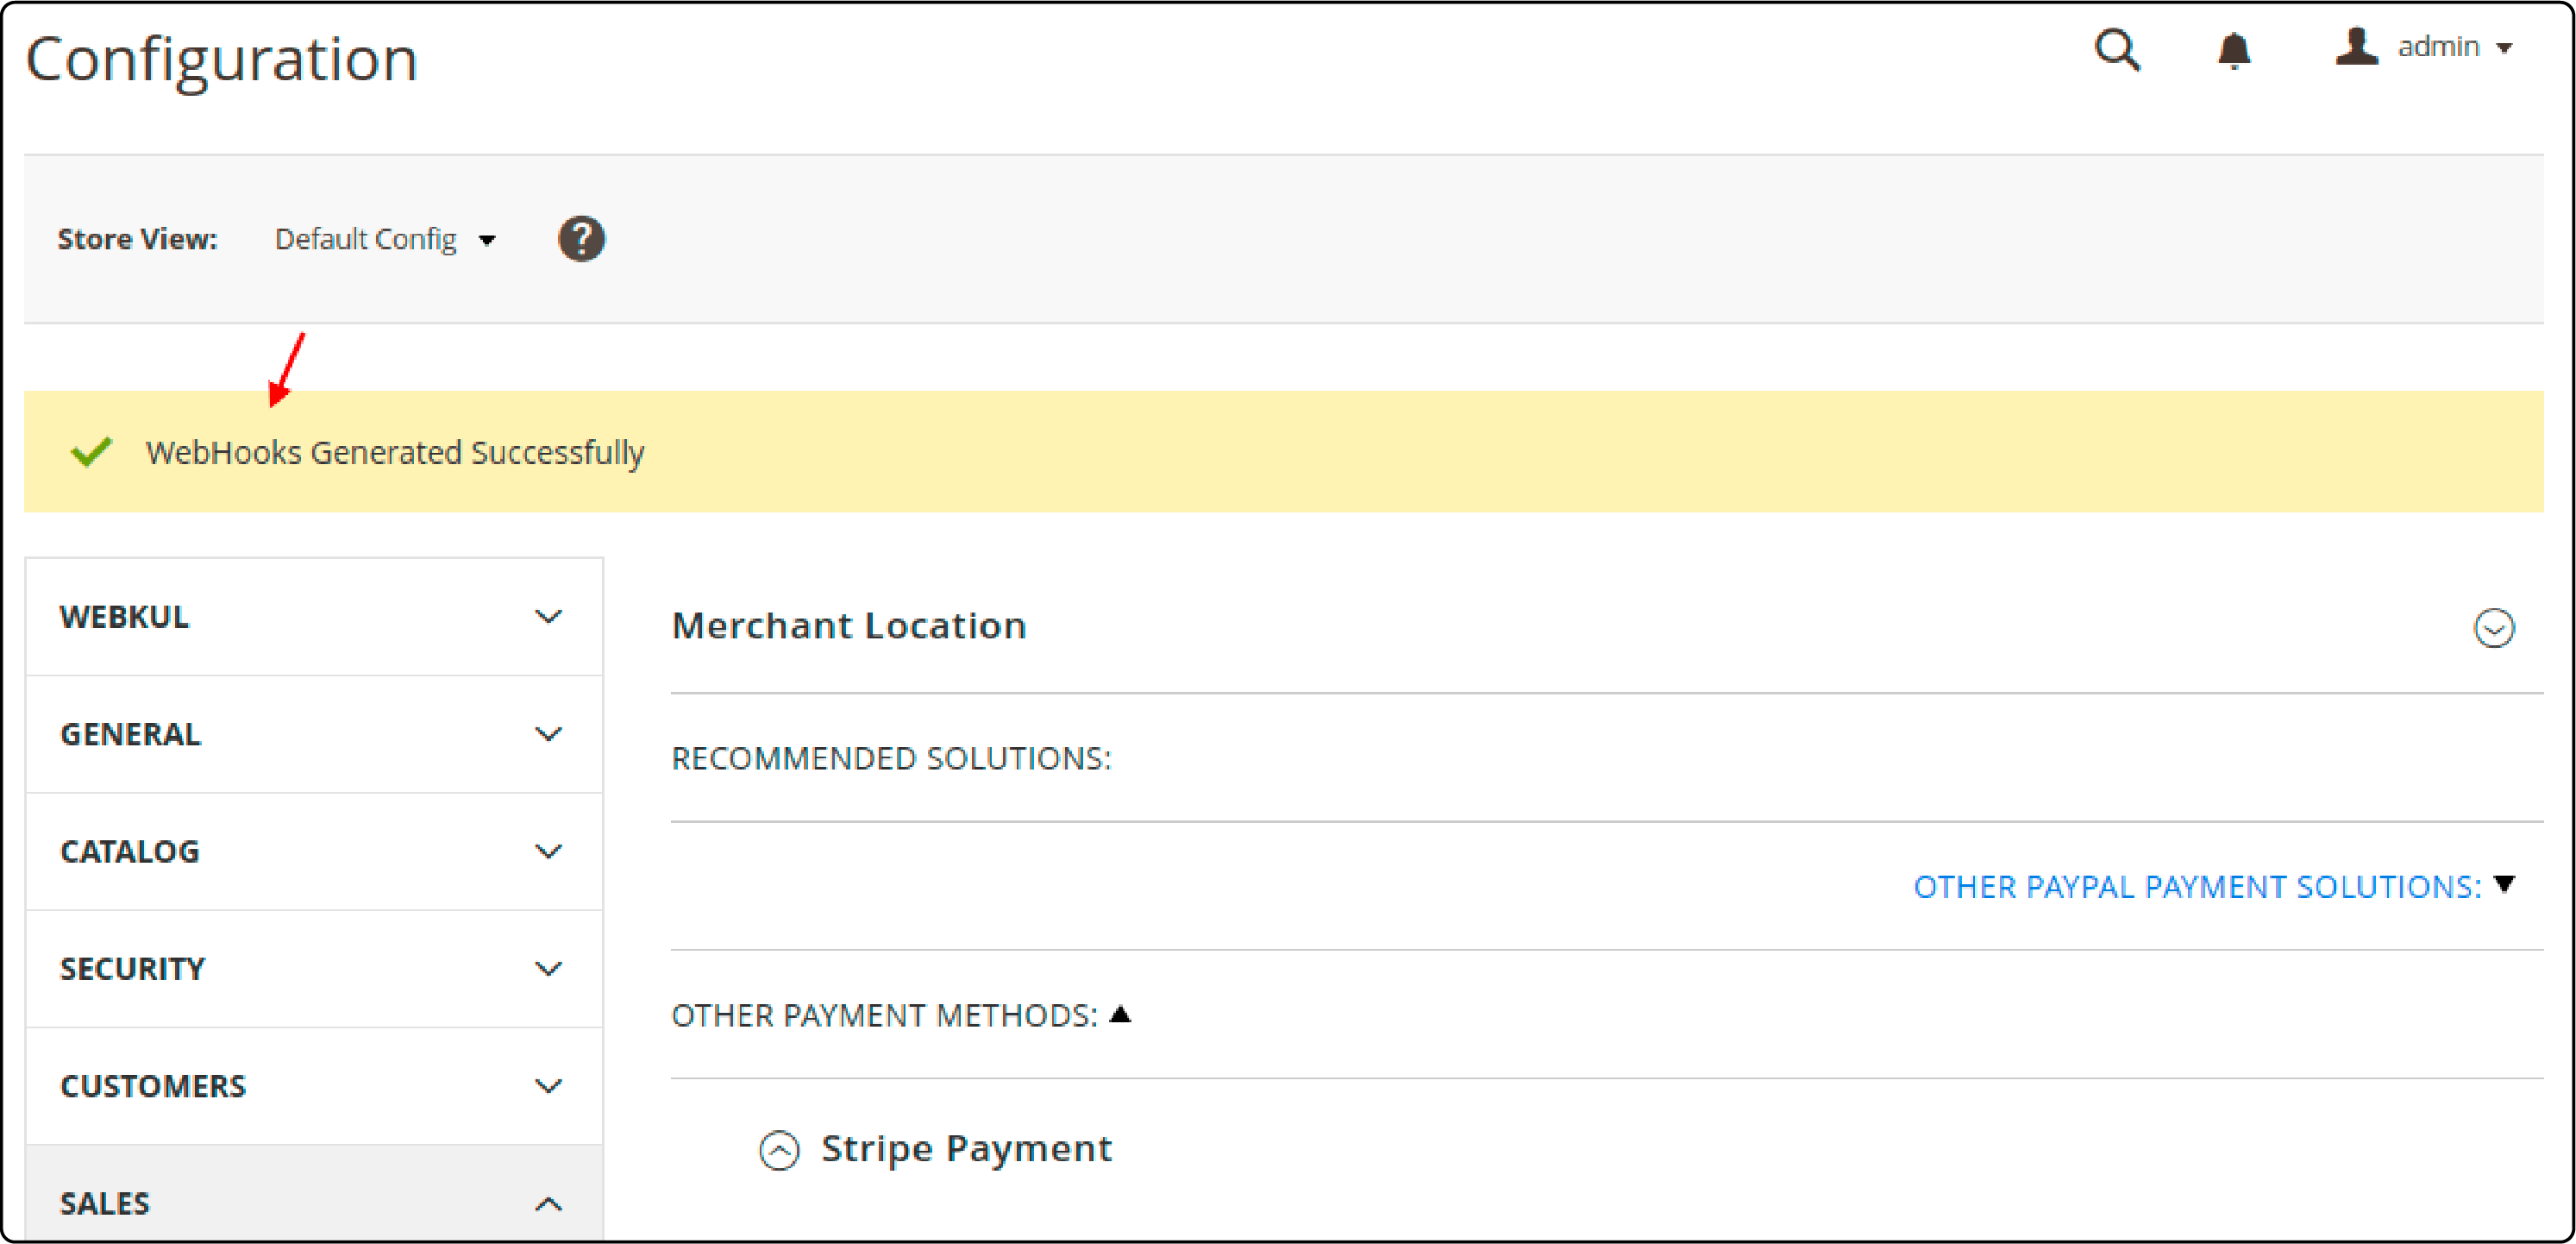 Confirmation screen of successful webhook generation in Magento 2 Stripe setup